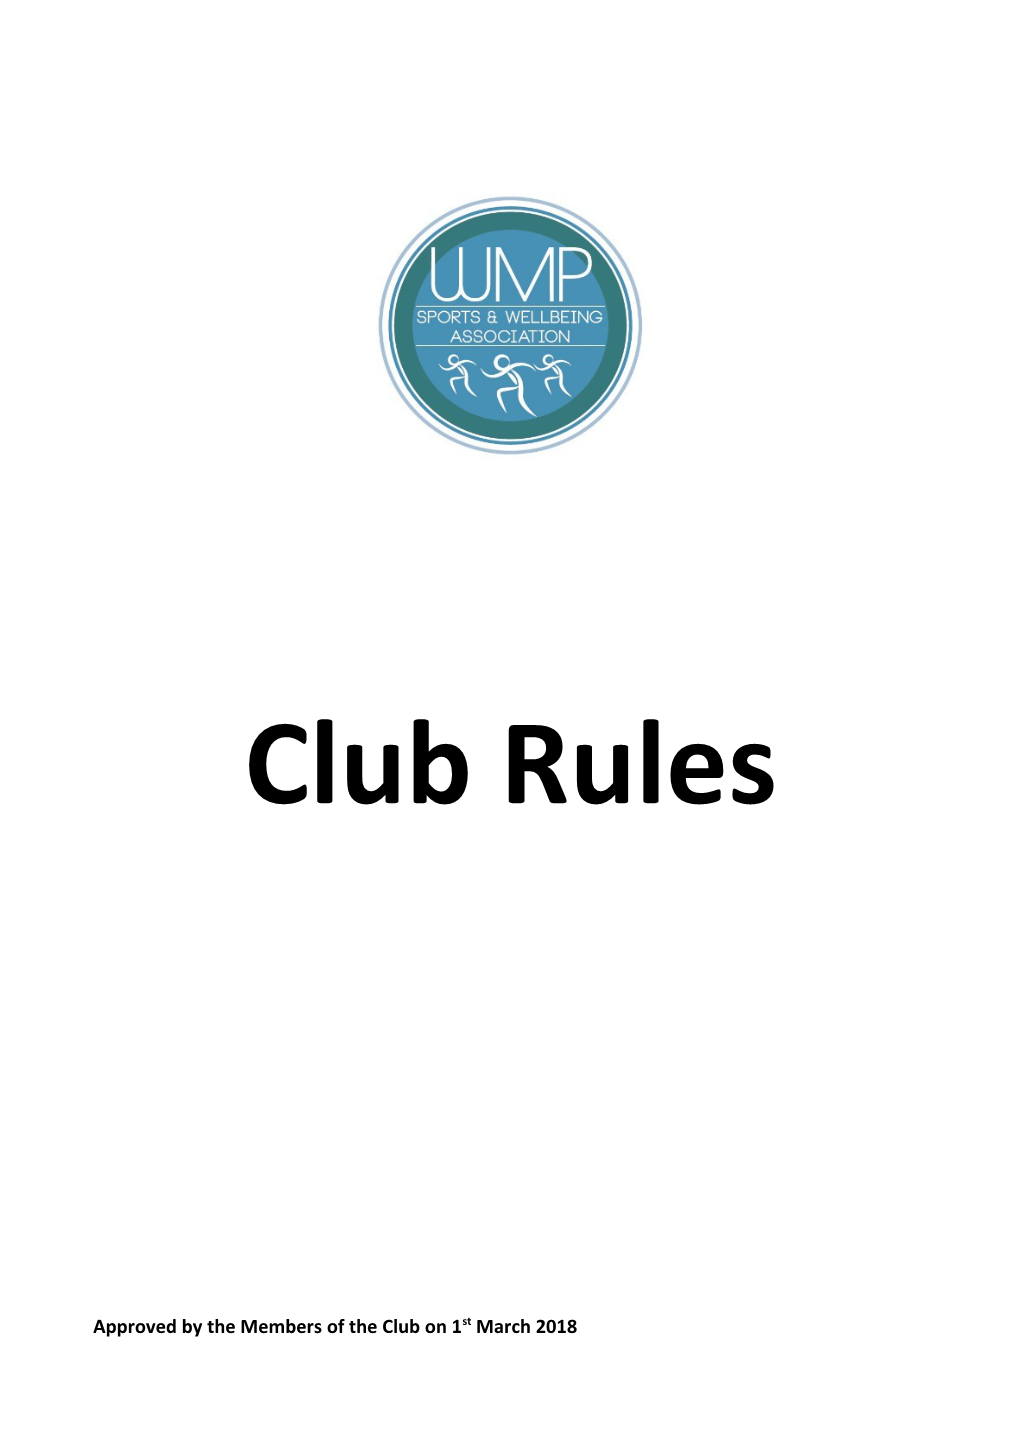 Approved by the Members of the Club on 1St March 2018